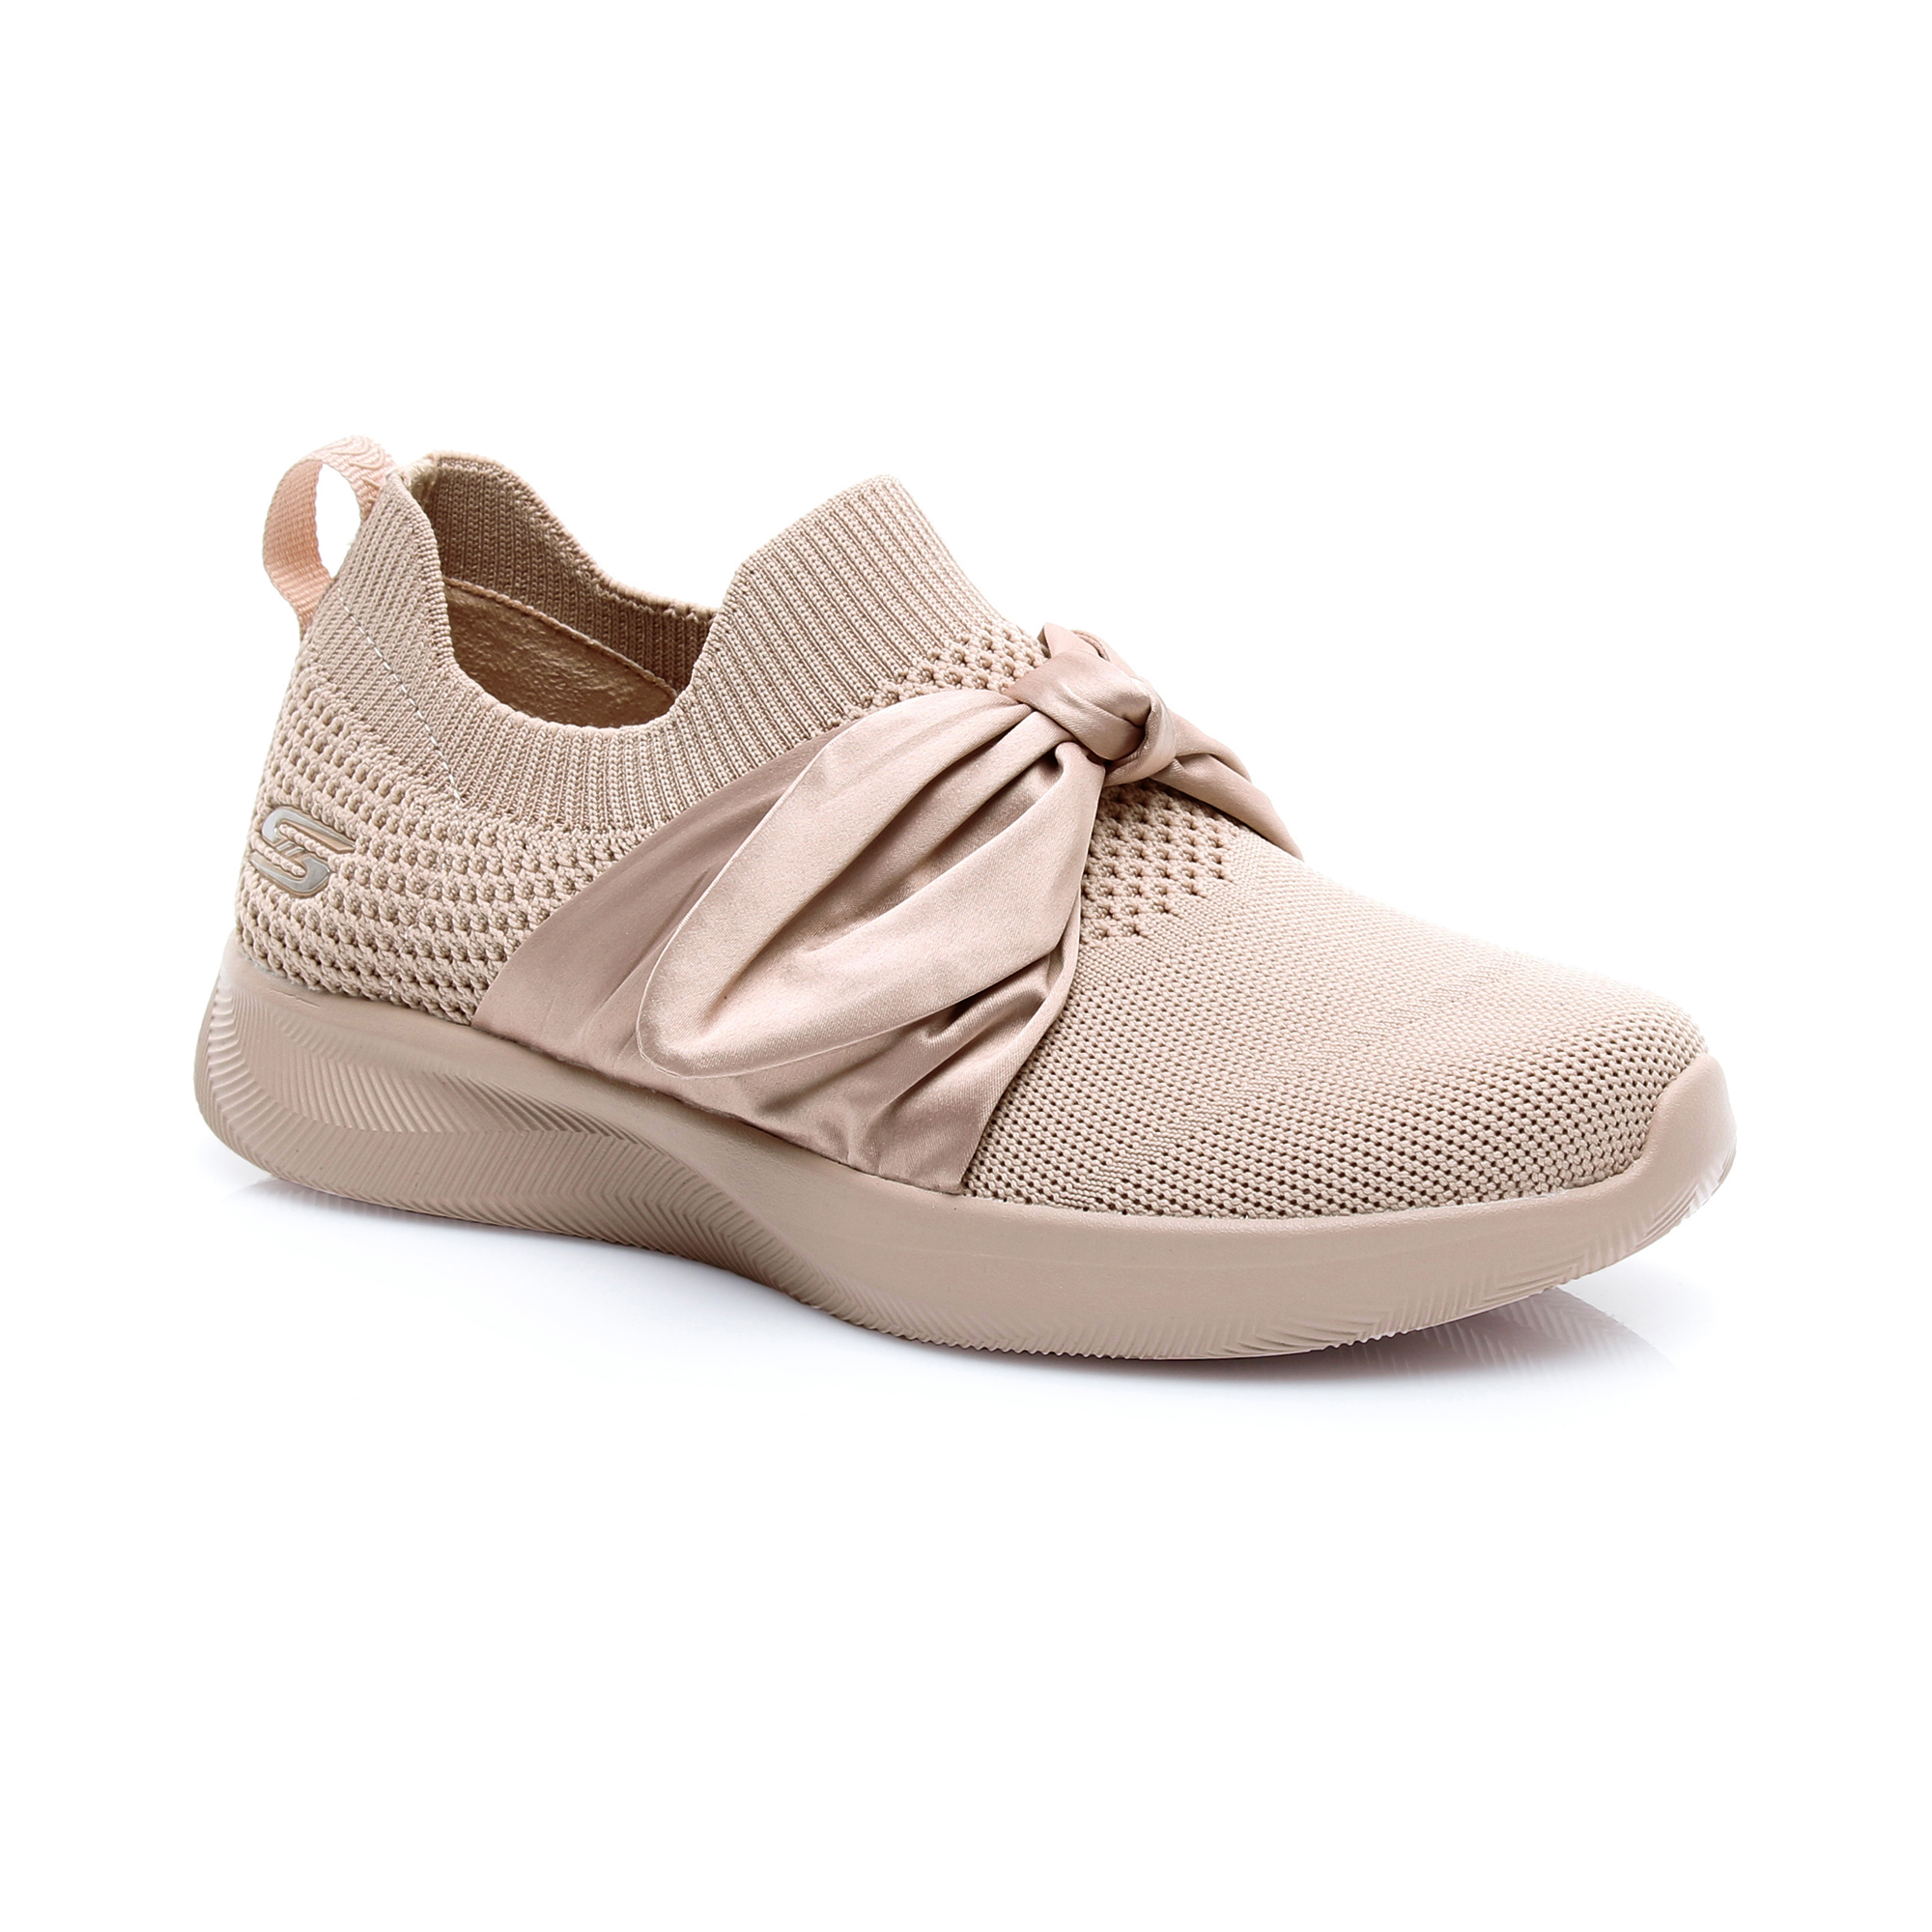 skechers bobs squad 2 bow